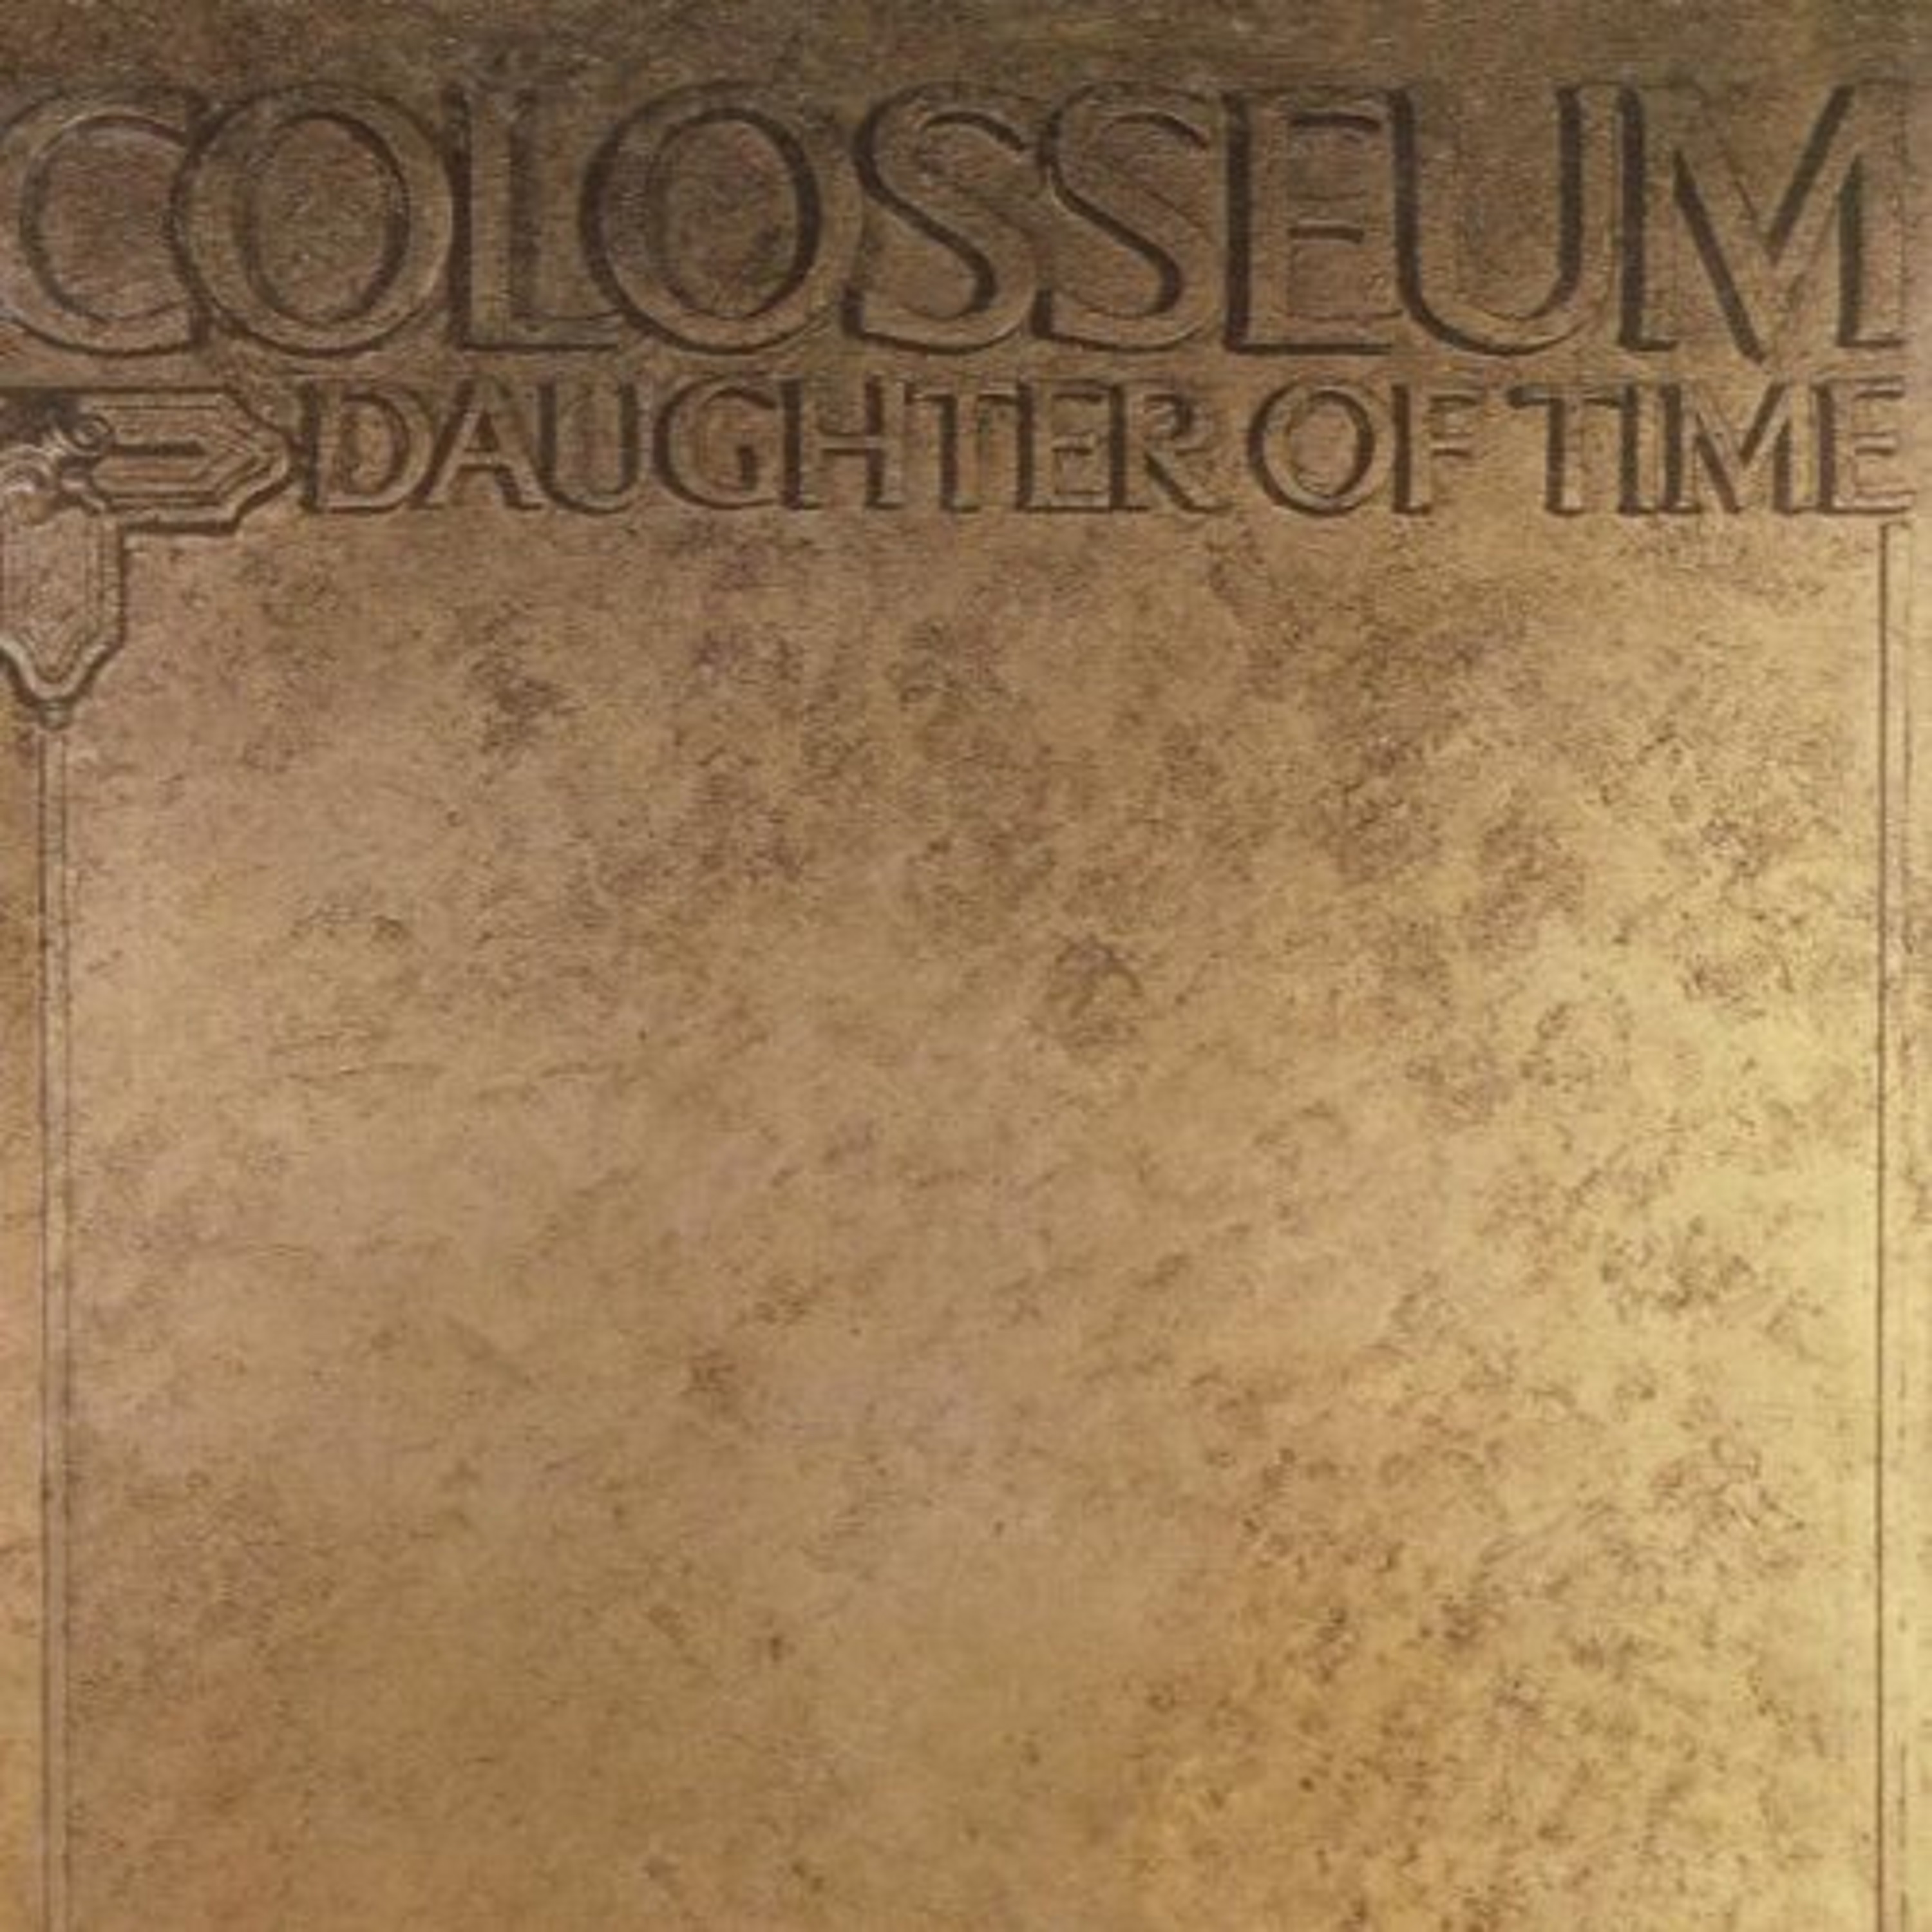 COLOSSEUM - DAUGHTER OF TIME: REMASTERED & EXPANDED EDITION-CD